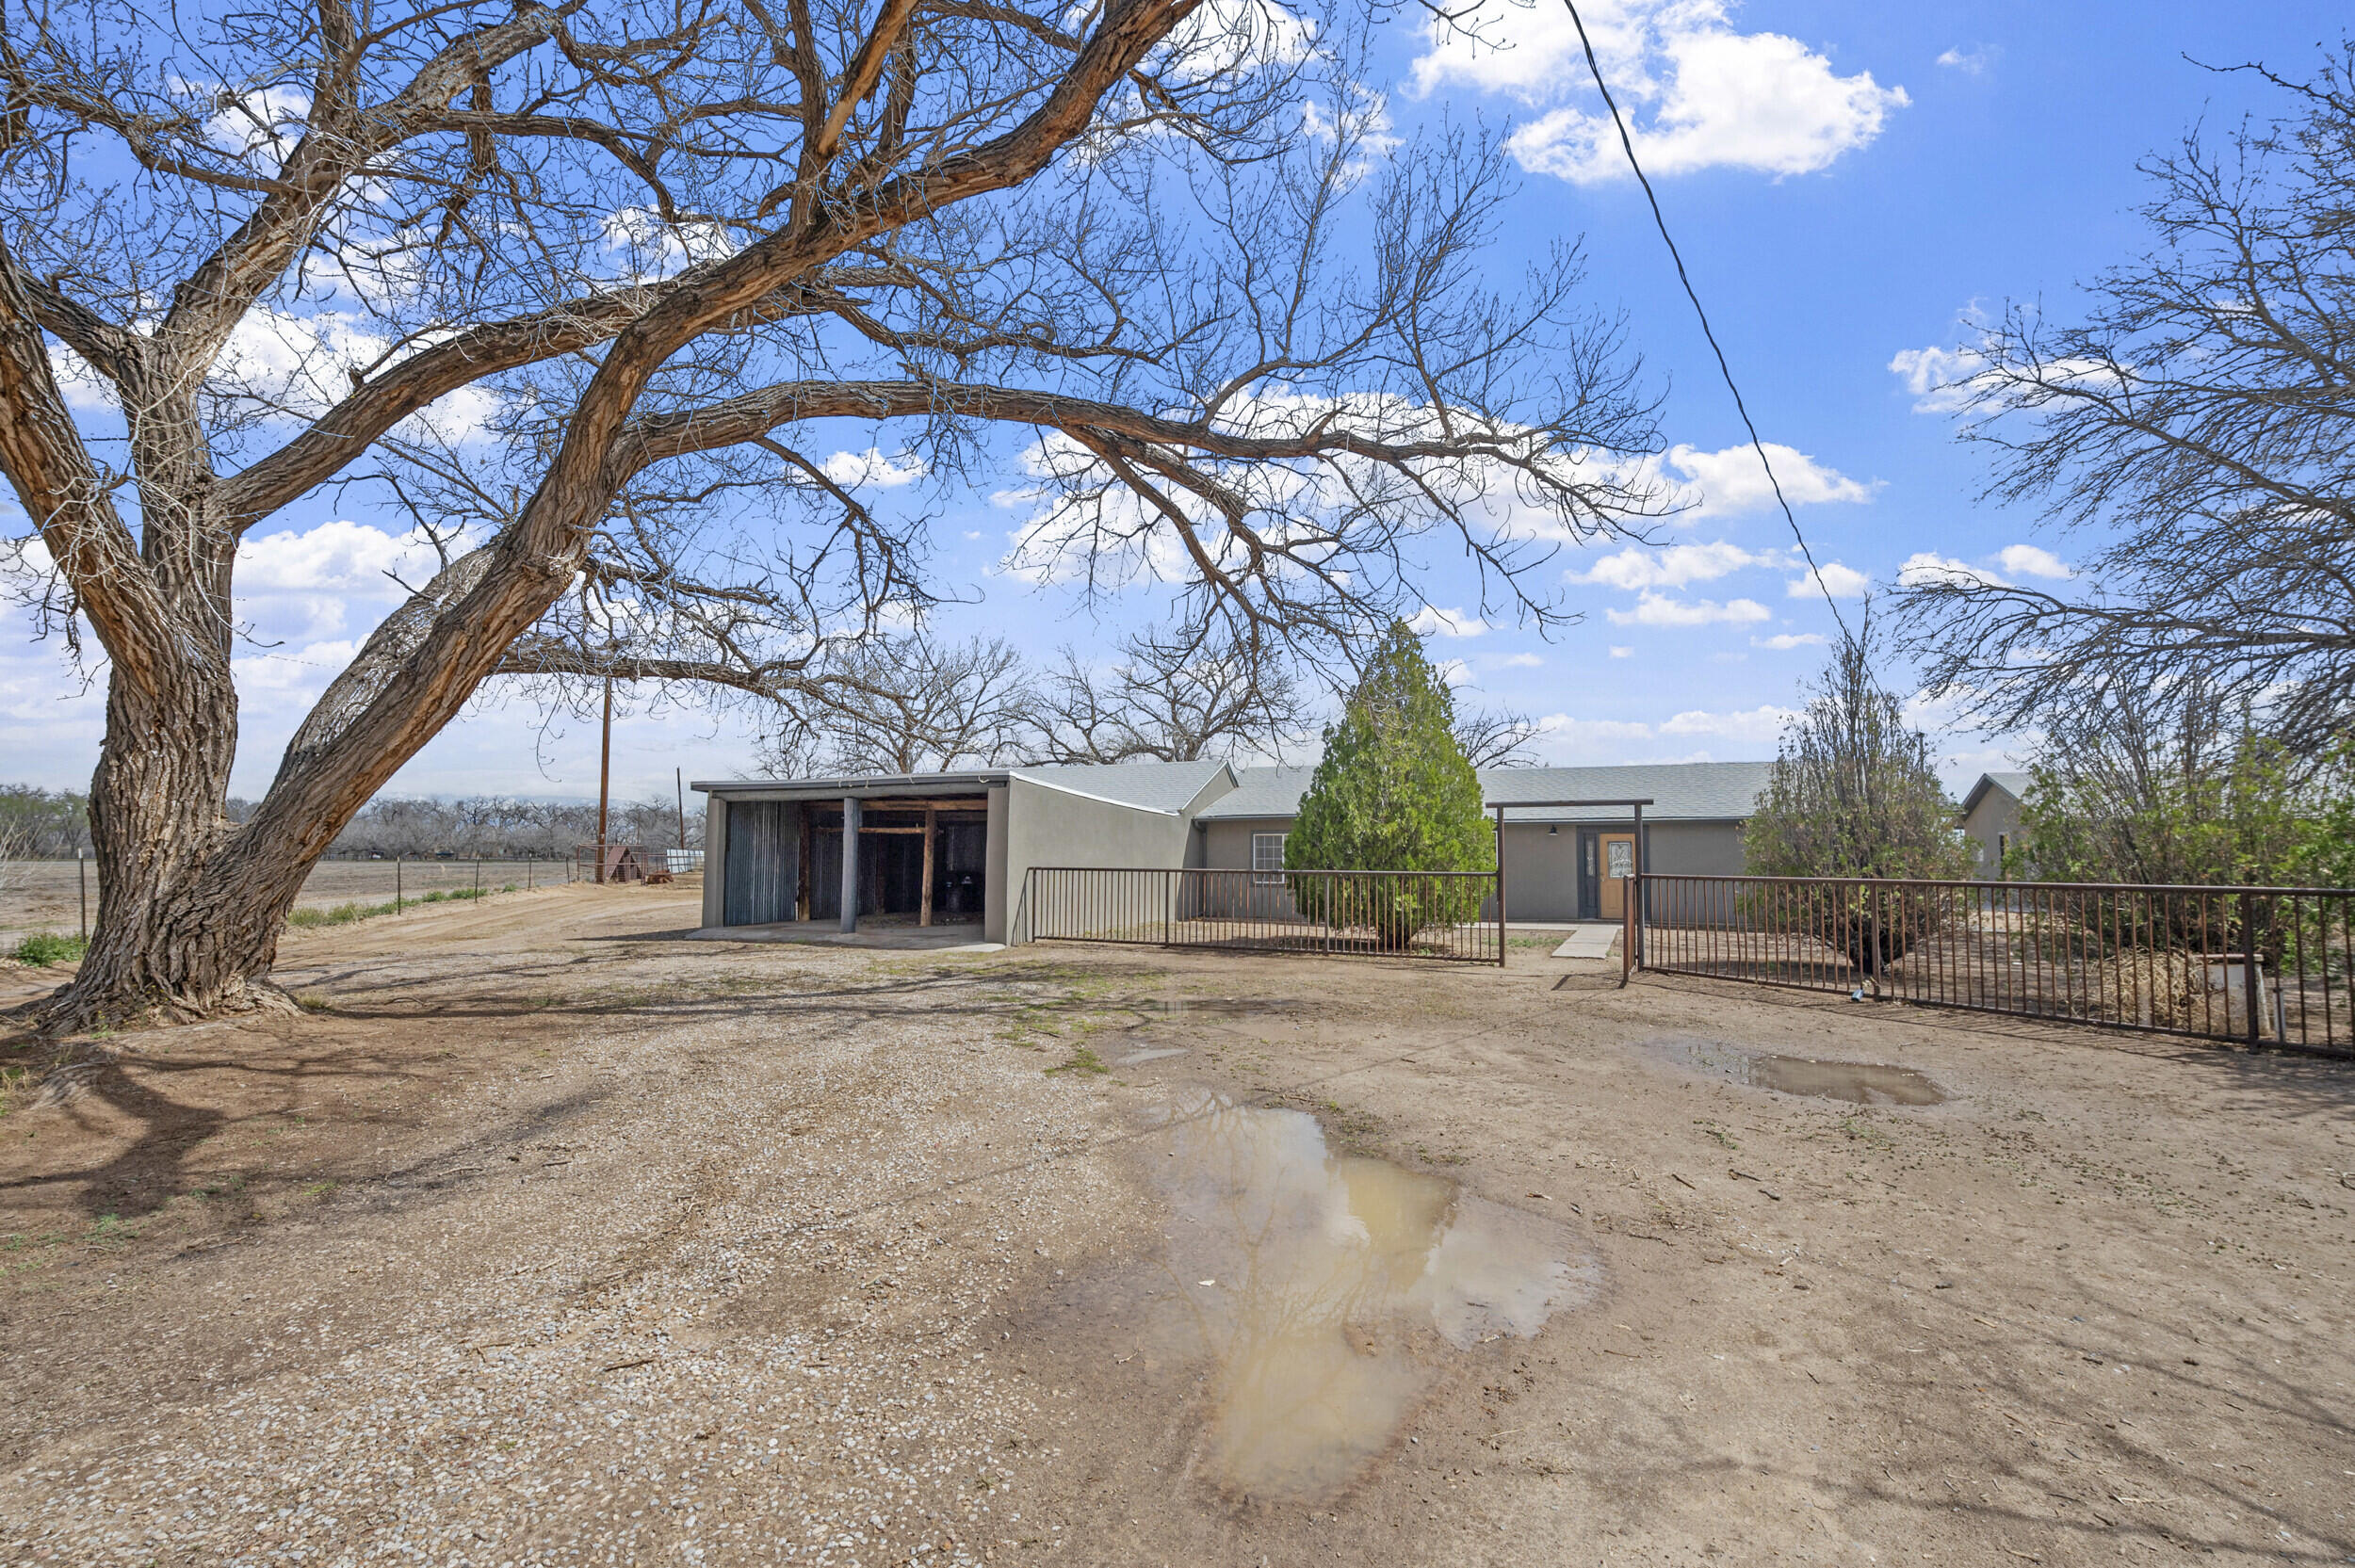 Perfectly tucked away on 4.28 acres is this remodeled home with casita and a 40X30 Shop.  Main home is 1564 sqft, 3 bedrooms, 2 bathrooms. Casita is 576 sqft, one bedroom, bathroom and cute living/kitchen area.